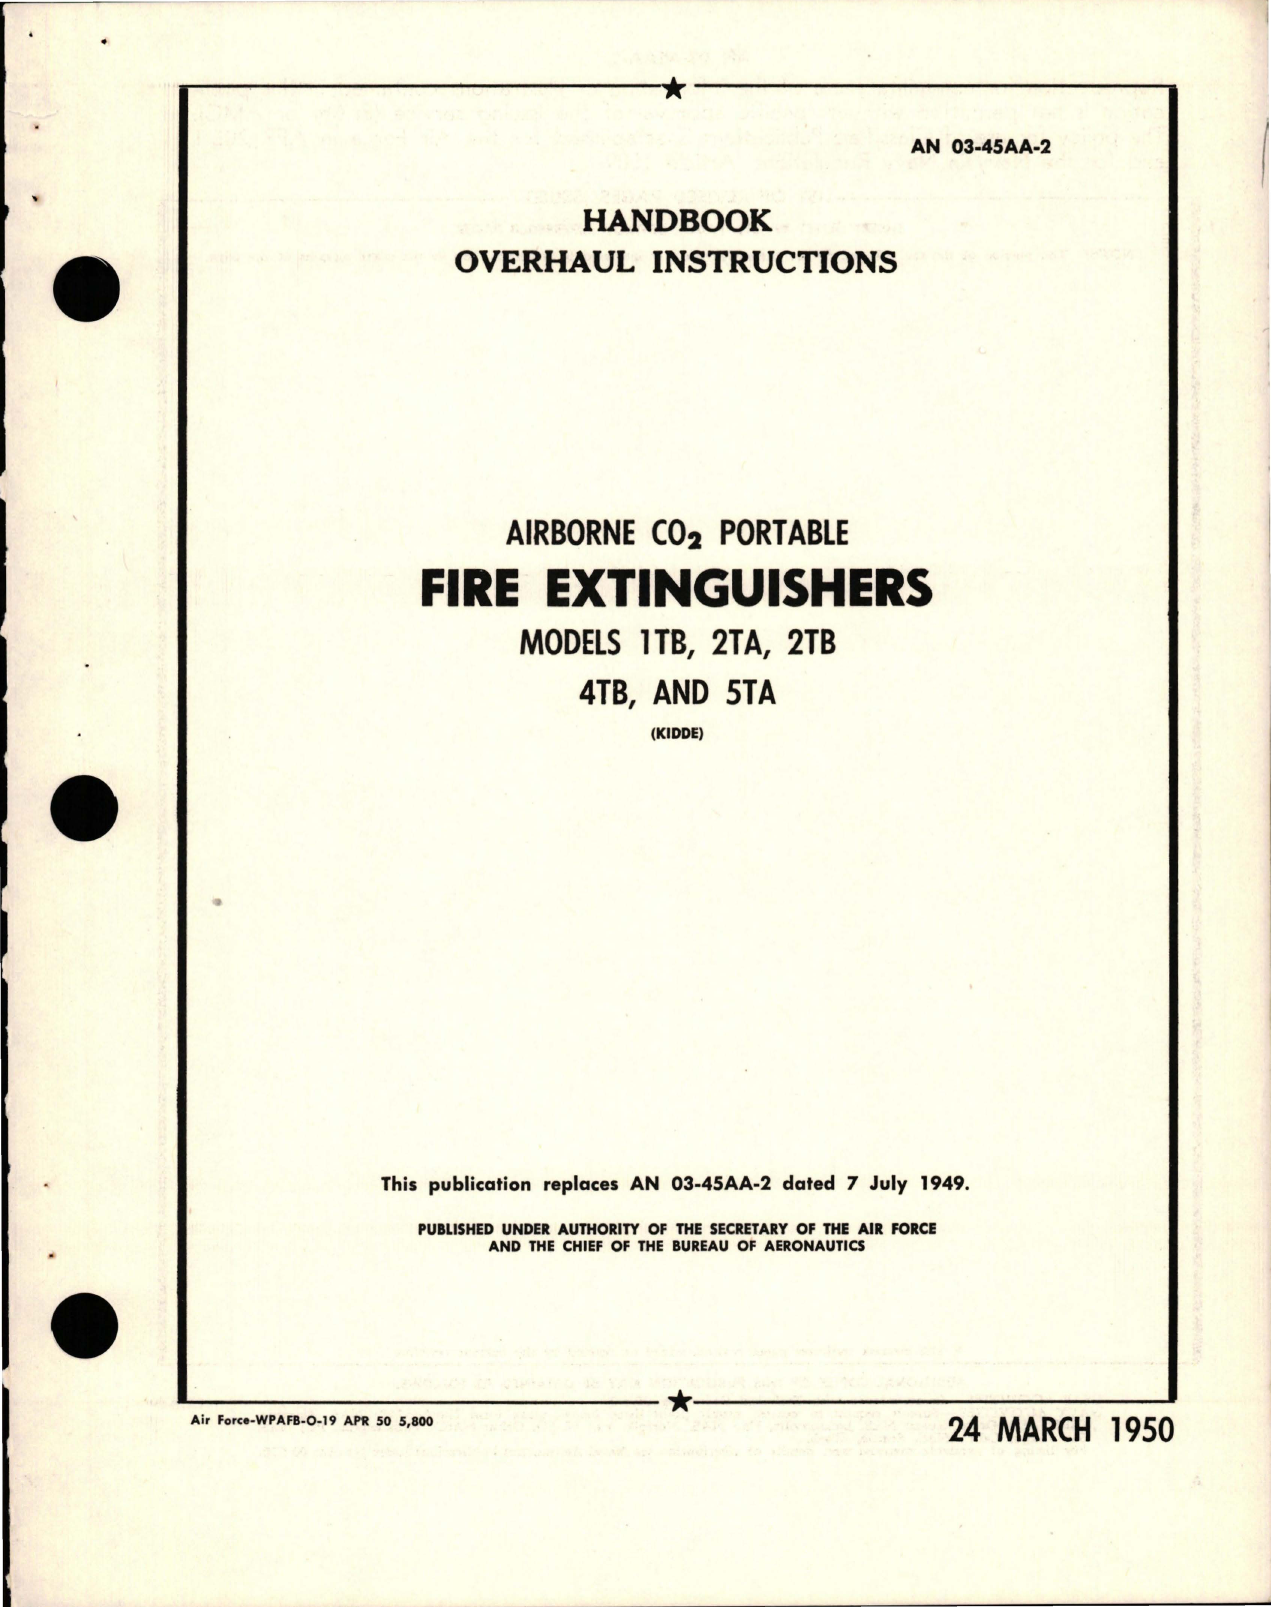 Sample page 1 from AirCorps Library document: Overhaul Instructions for Airborne CO2 Portable Fire Extinguishers - Models 1TB, 2TA, 2TB, 4TB, and 5TA